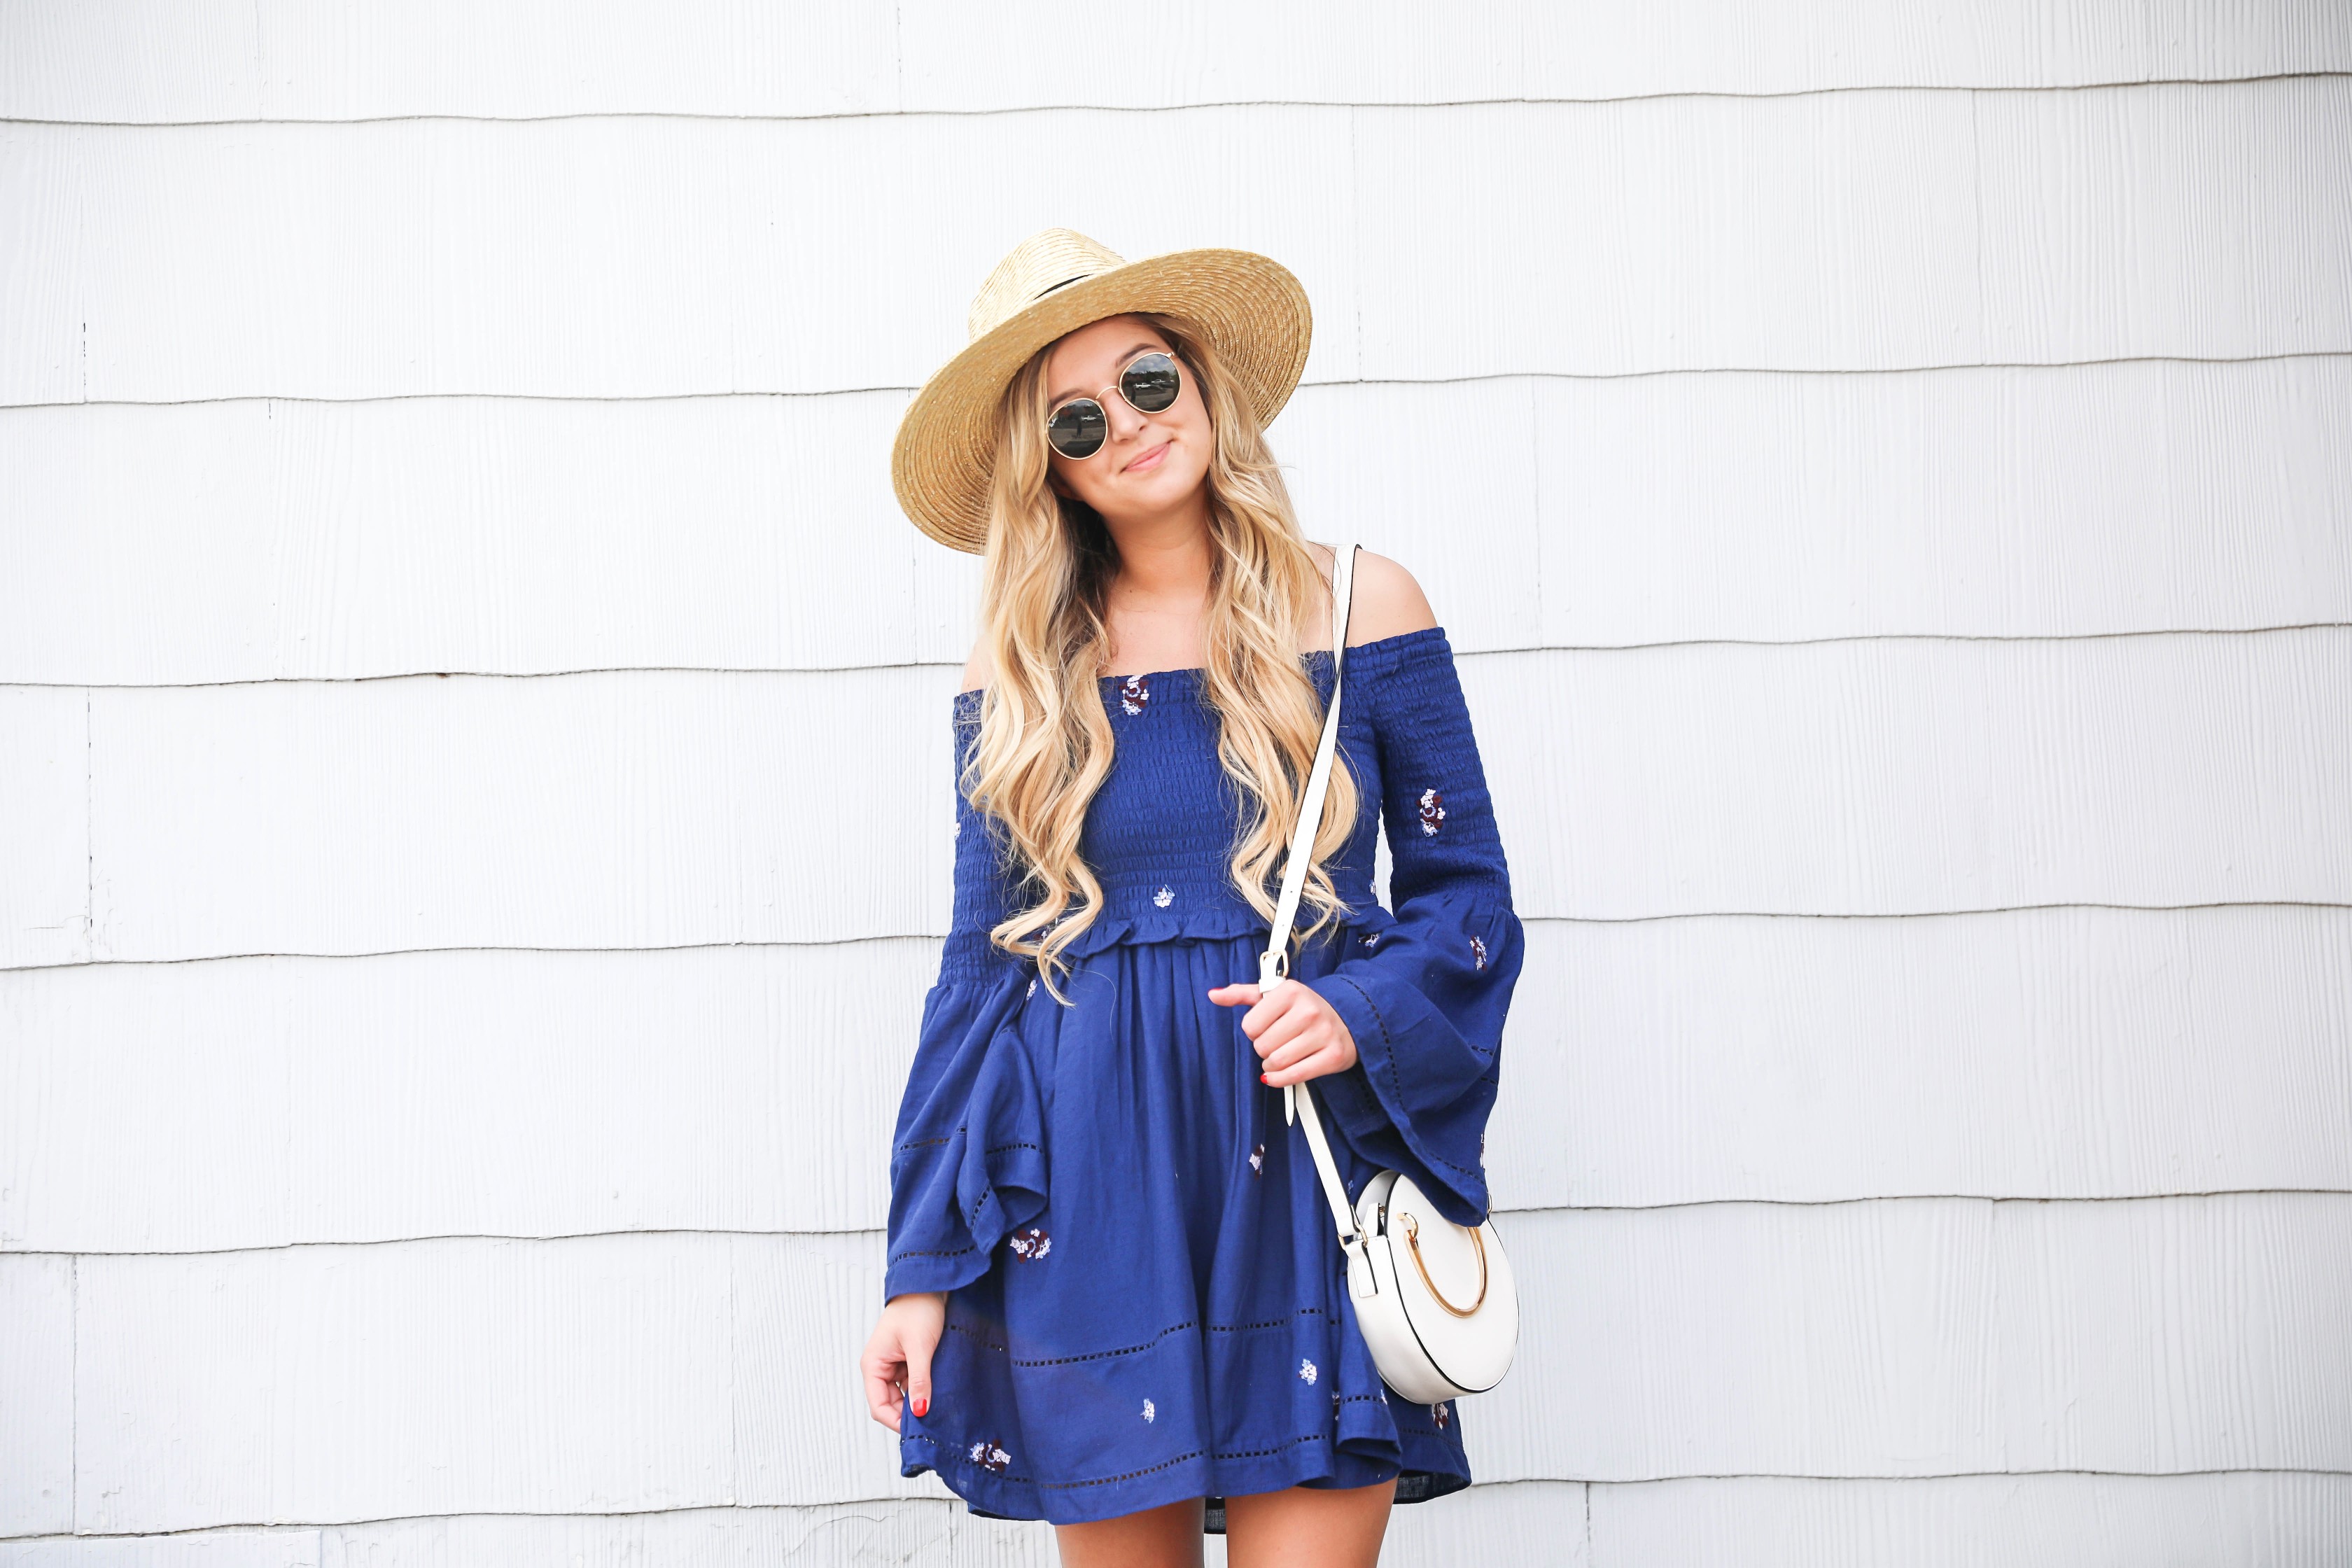 Navy free people off the shoulder embroidered dress! Love this summer fashion look! This summer dress will be perfect for days on the town or nights out! Details on fashion blog daily dose of charm by fashion blogger lauren lindmark